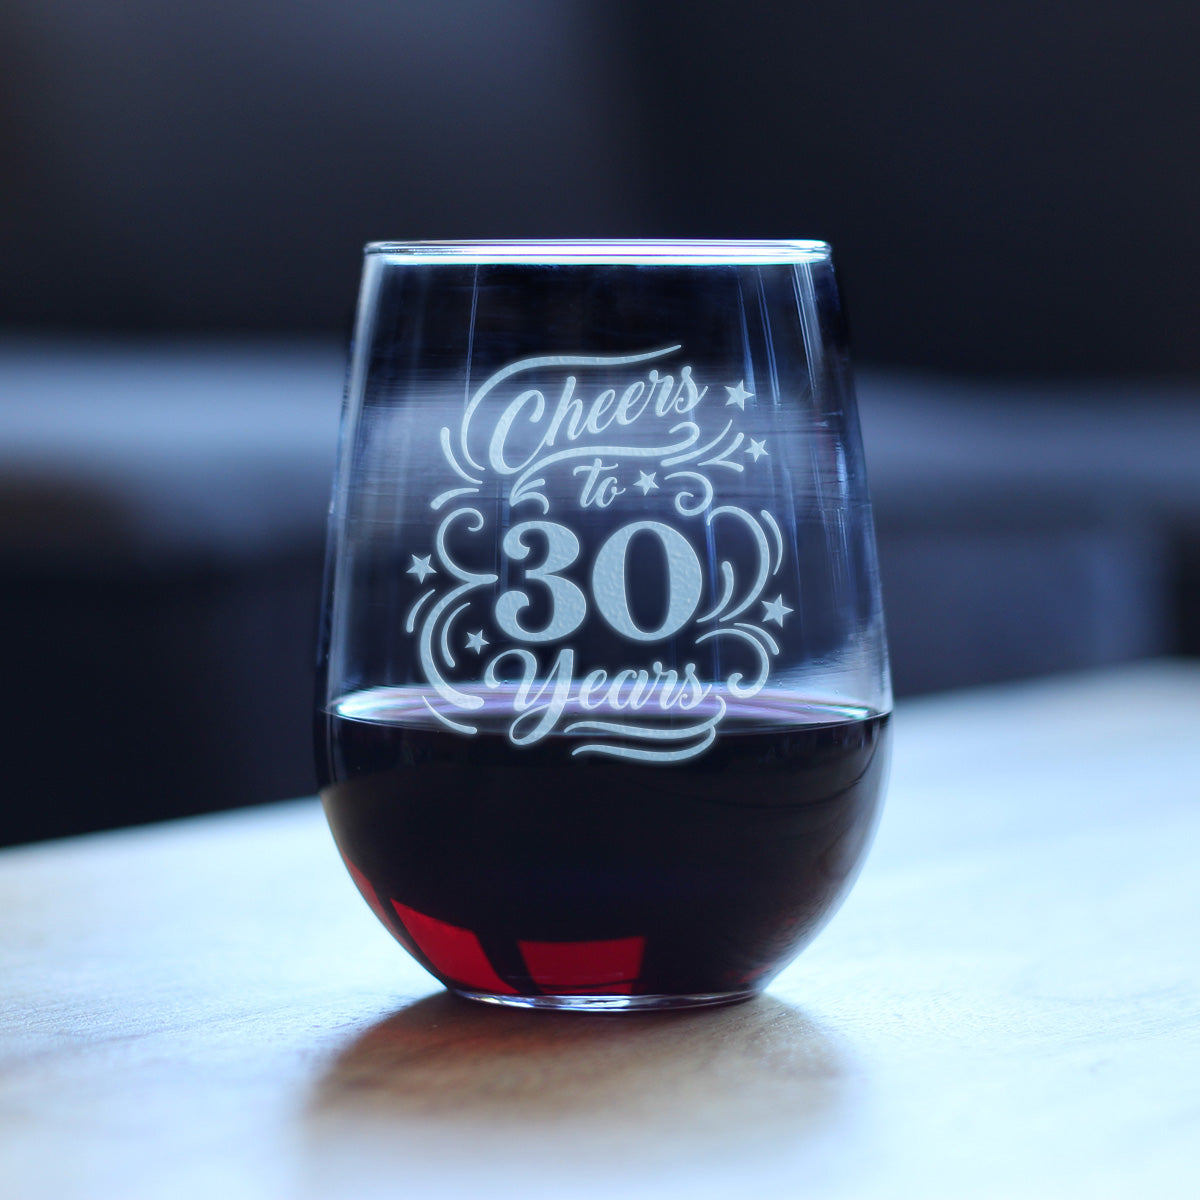 Cheers to 30 Years - Stemless Wine Glass Gifts for Women &amp; Men - 30th Anniversary or Birthday Party Decor - Large Glasses